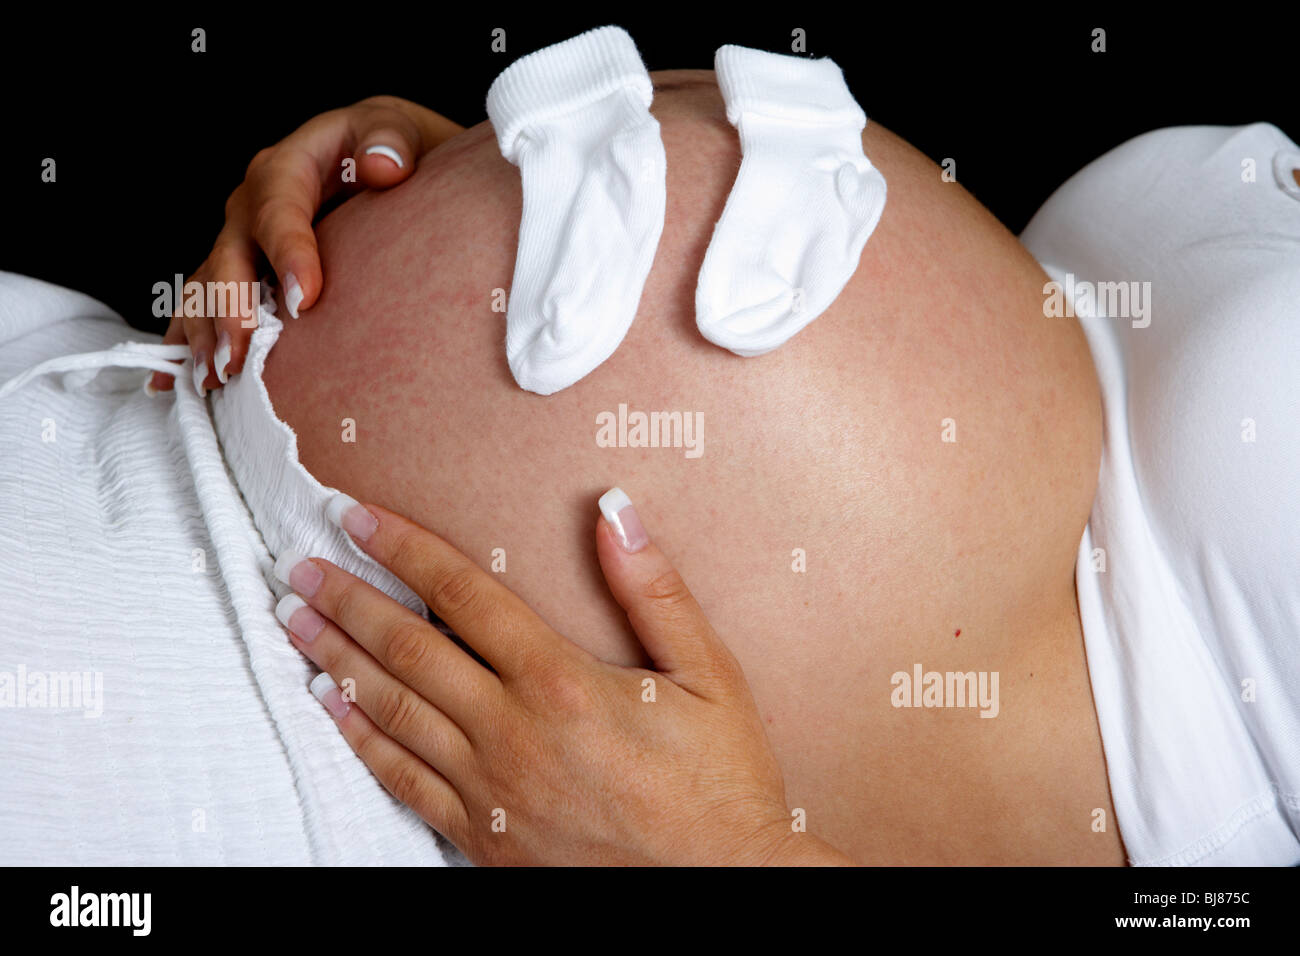 8 month pregnant woman 30 years of age with baby bump and small baby socks Stock Photo